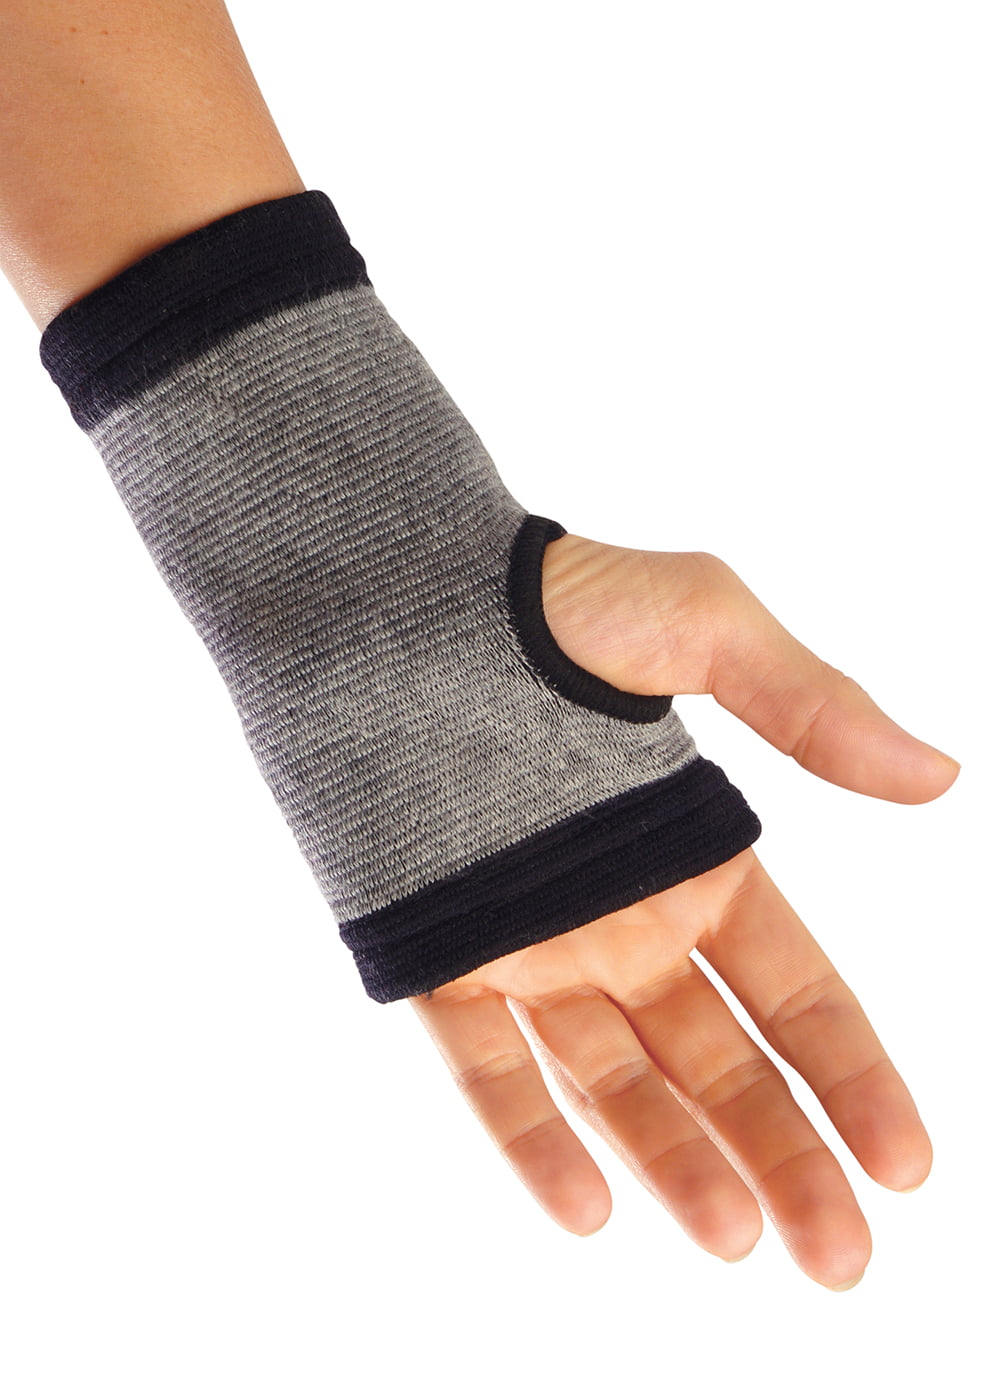 Pair Wrist Brace Guard Sports Support Protection Breathable Bamboo Charcoal 2pcs 